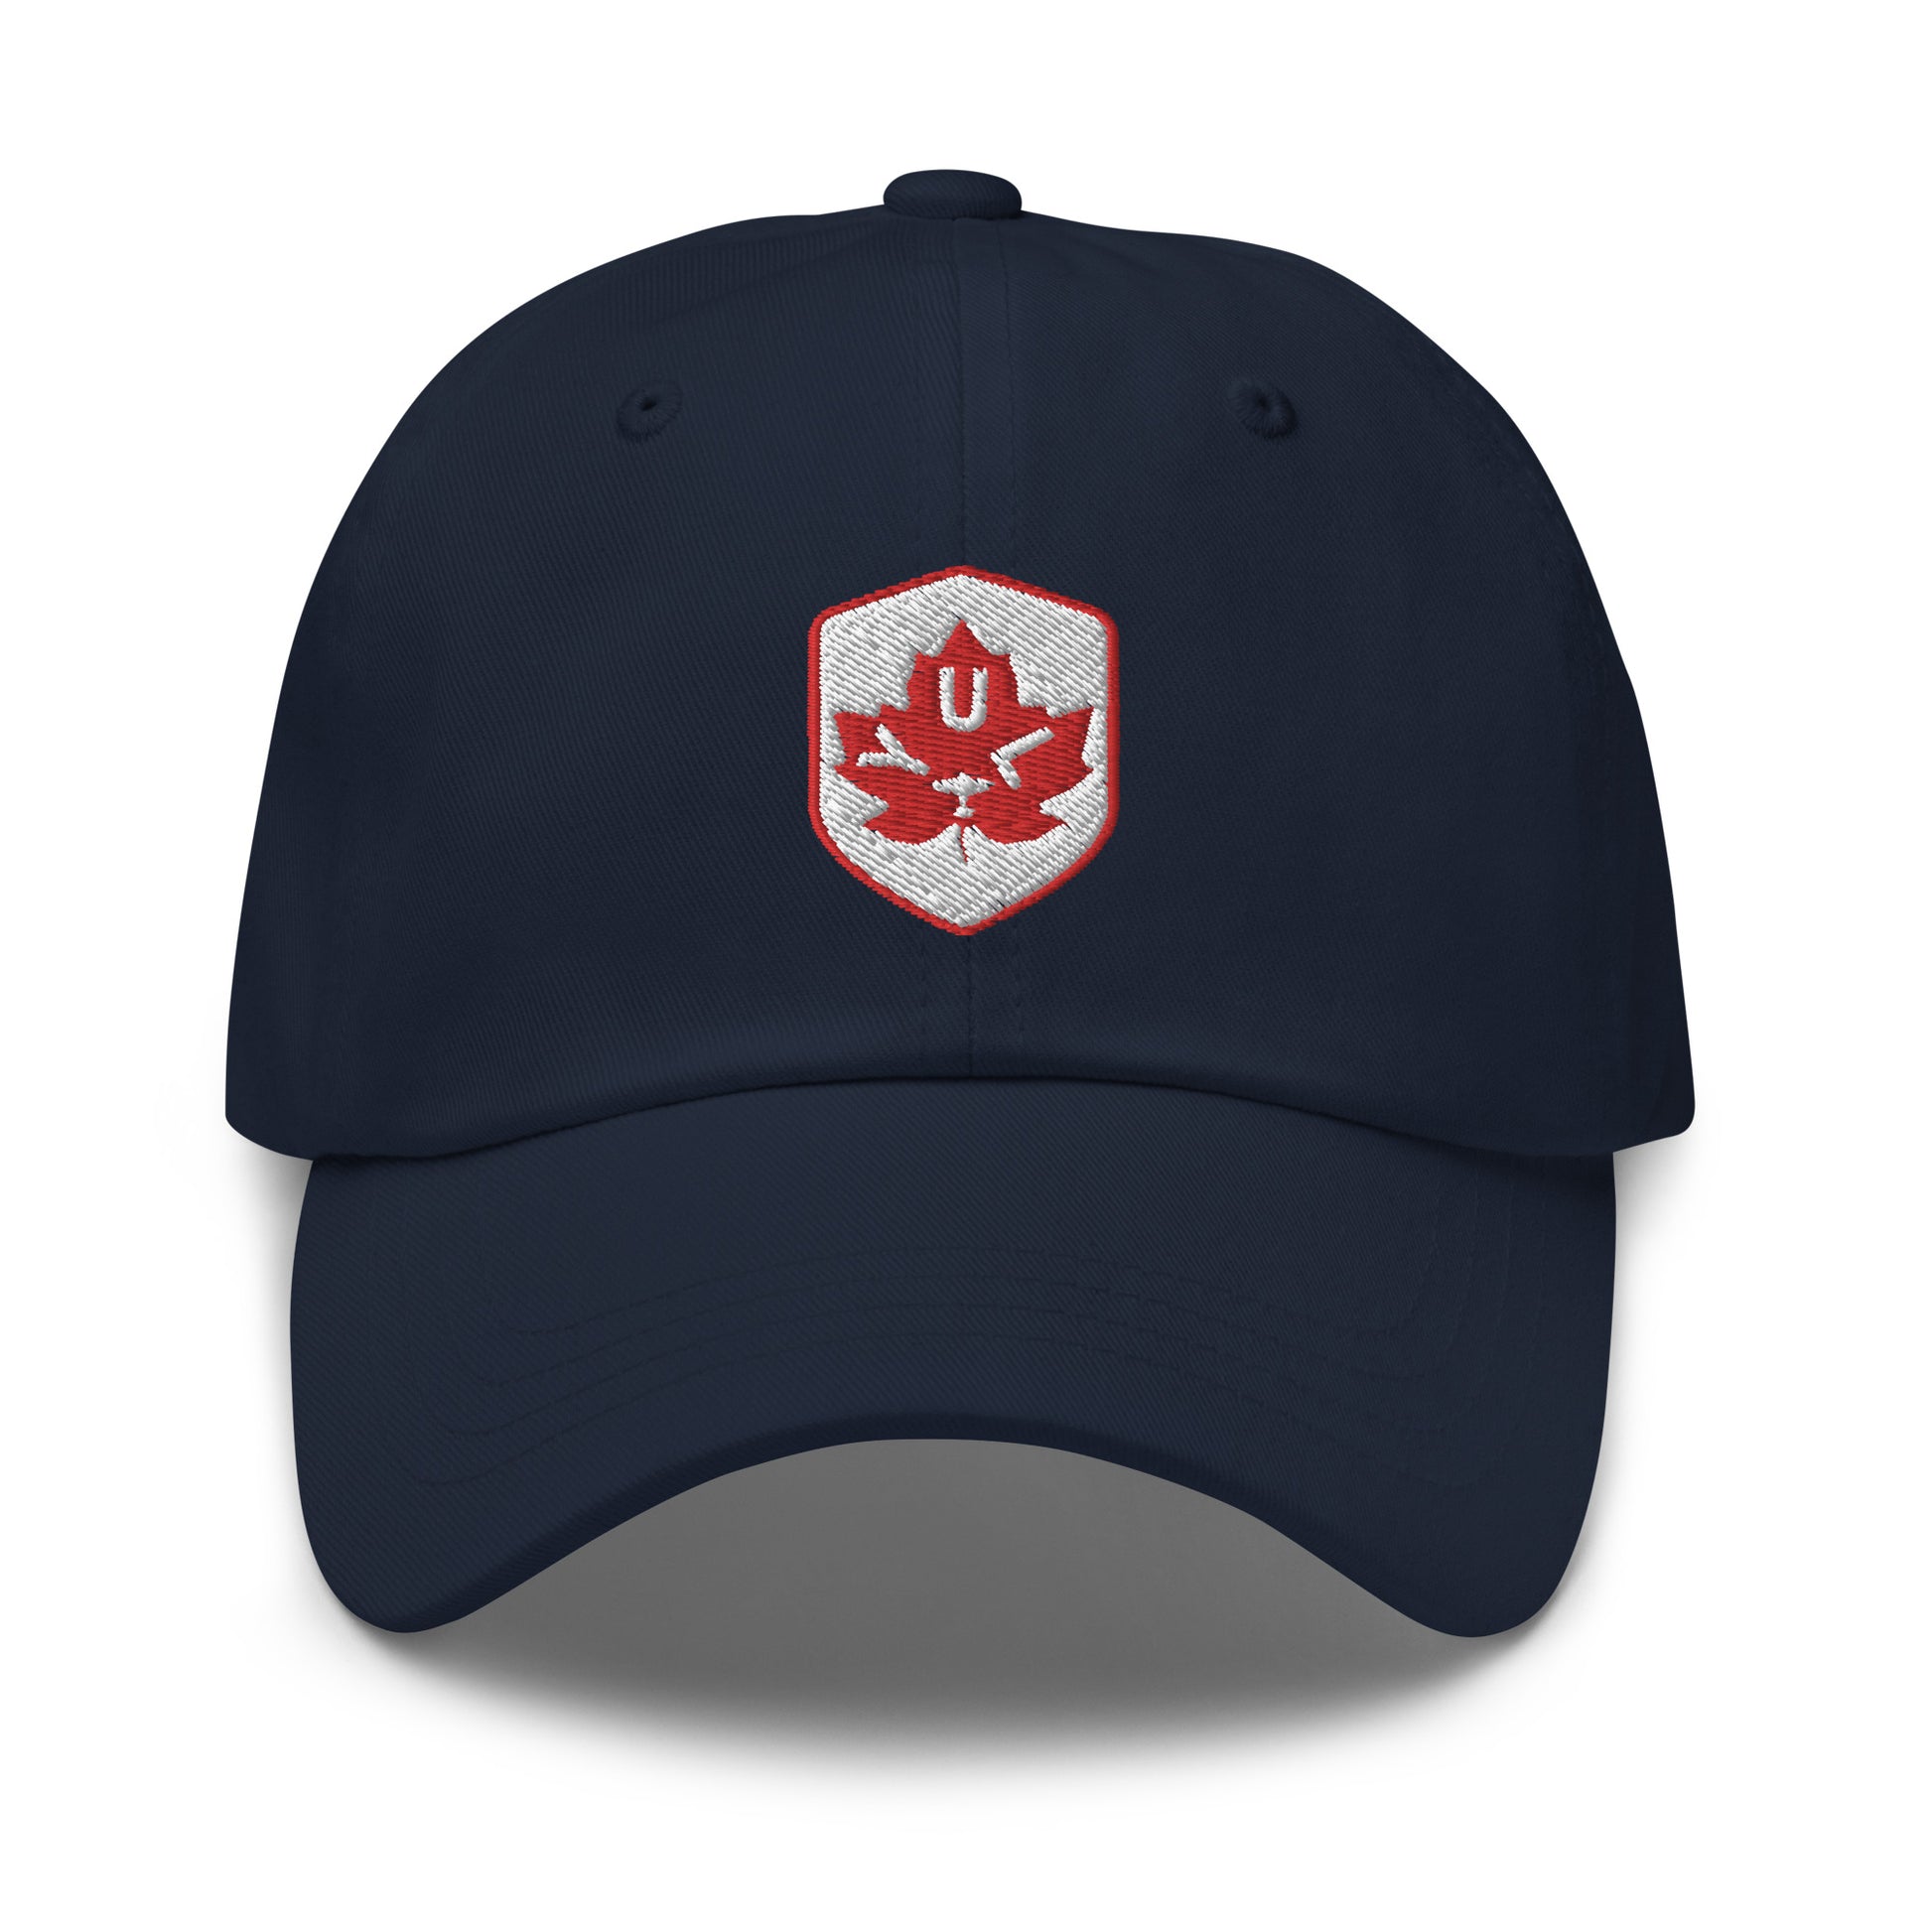 Maple Leaf Baseball Cap - Red/White • YUL Montreal • YHM Designs - Image 13